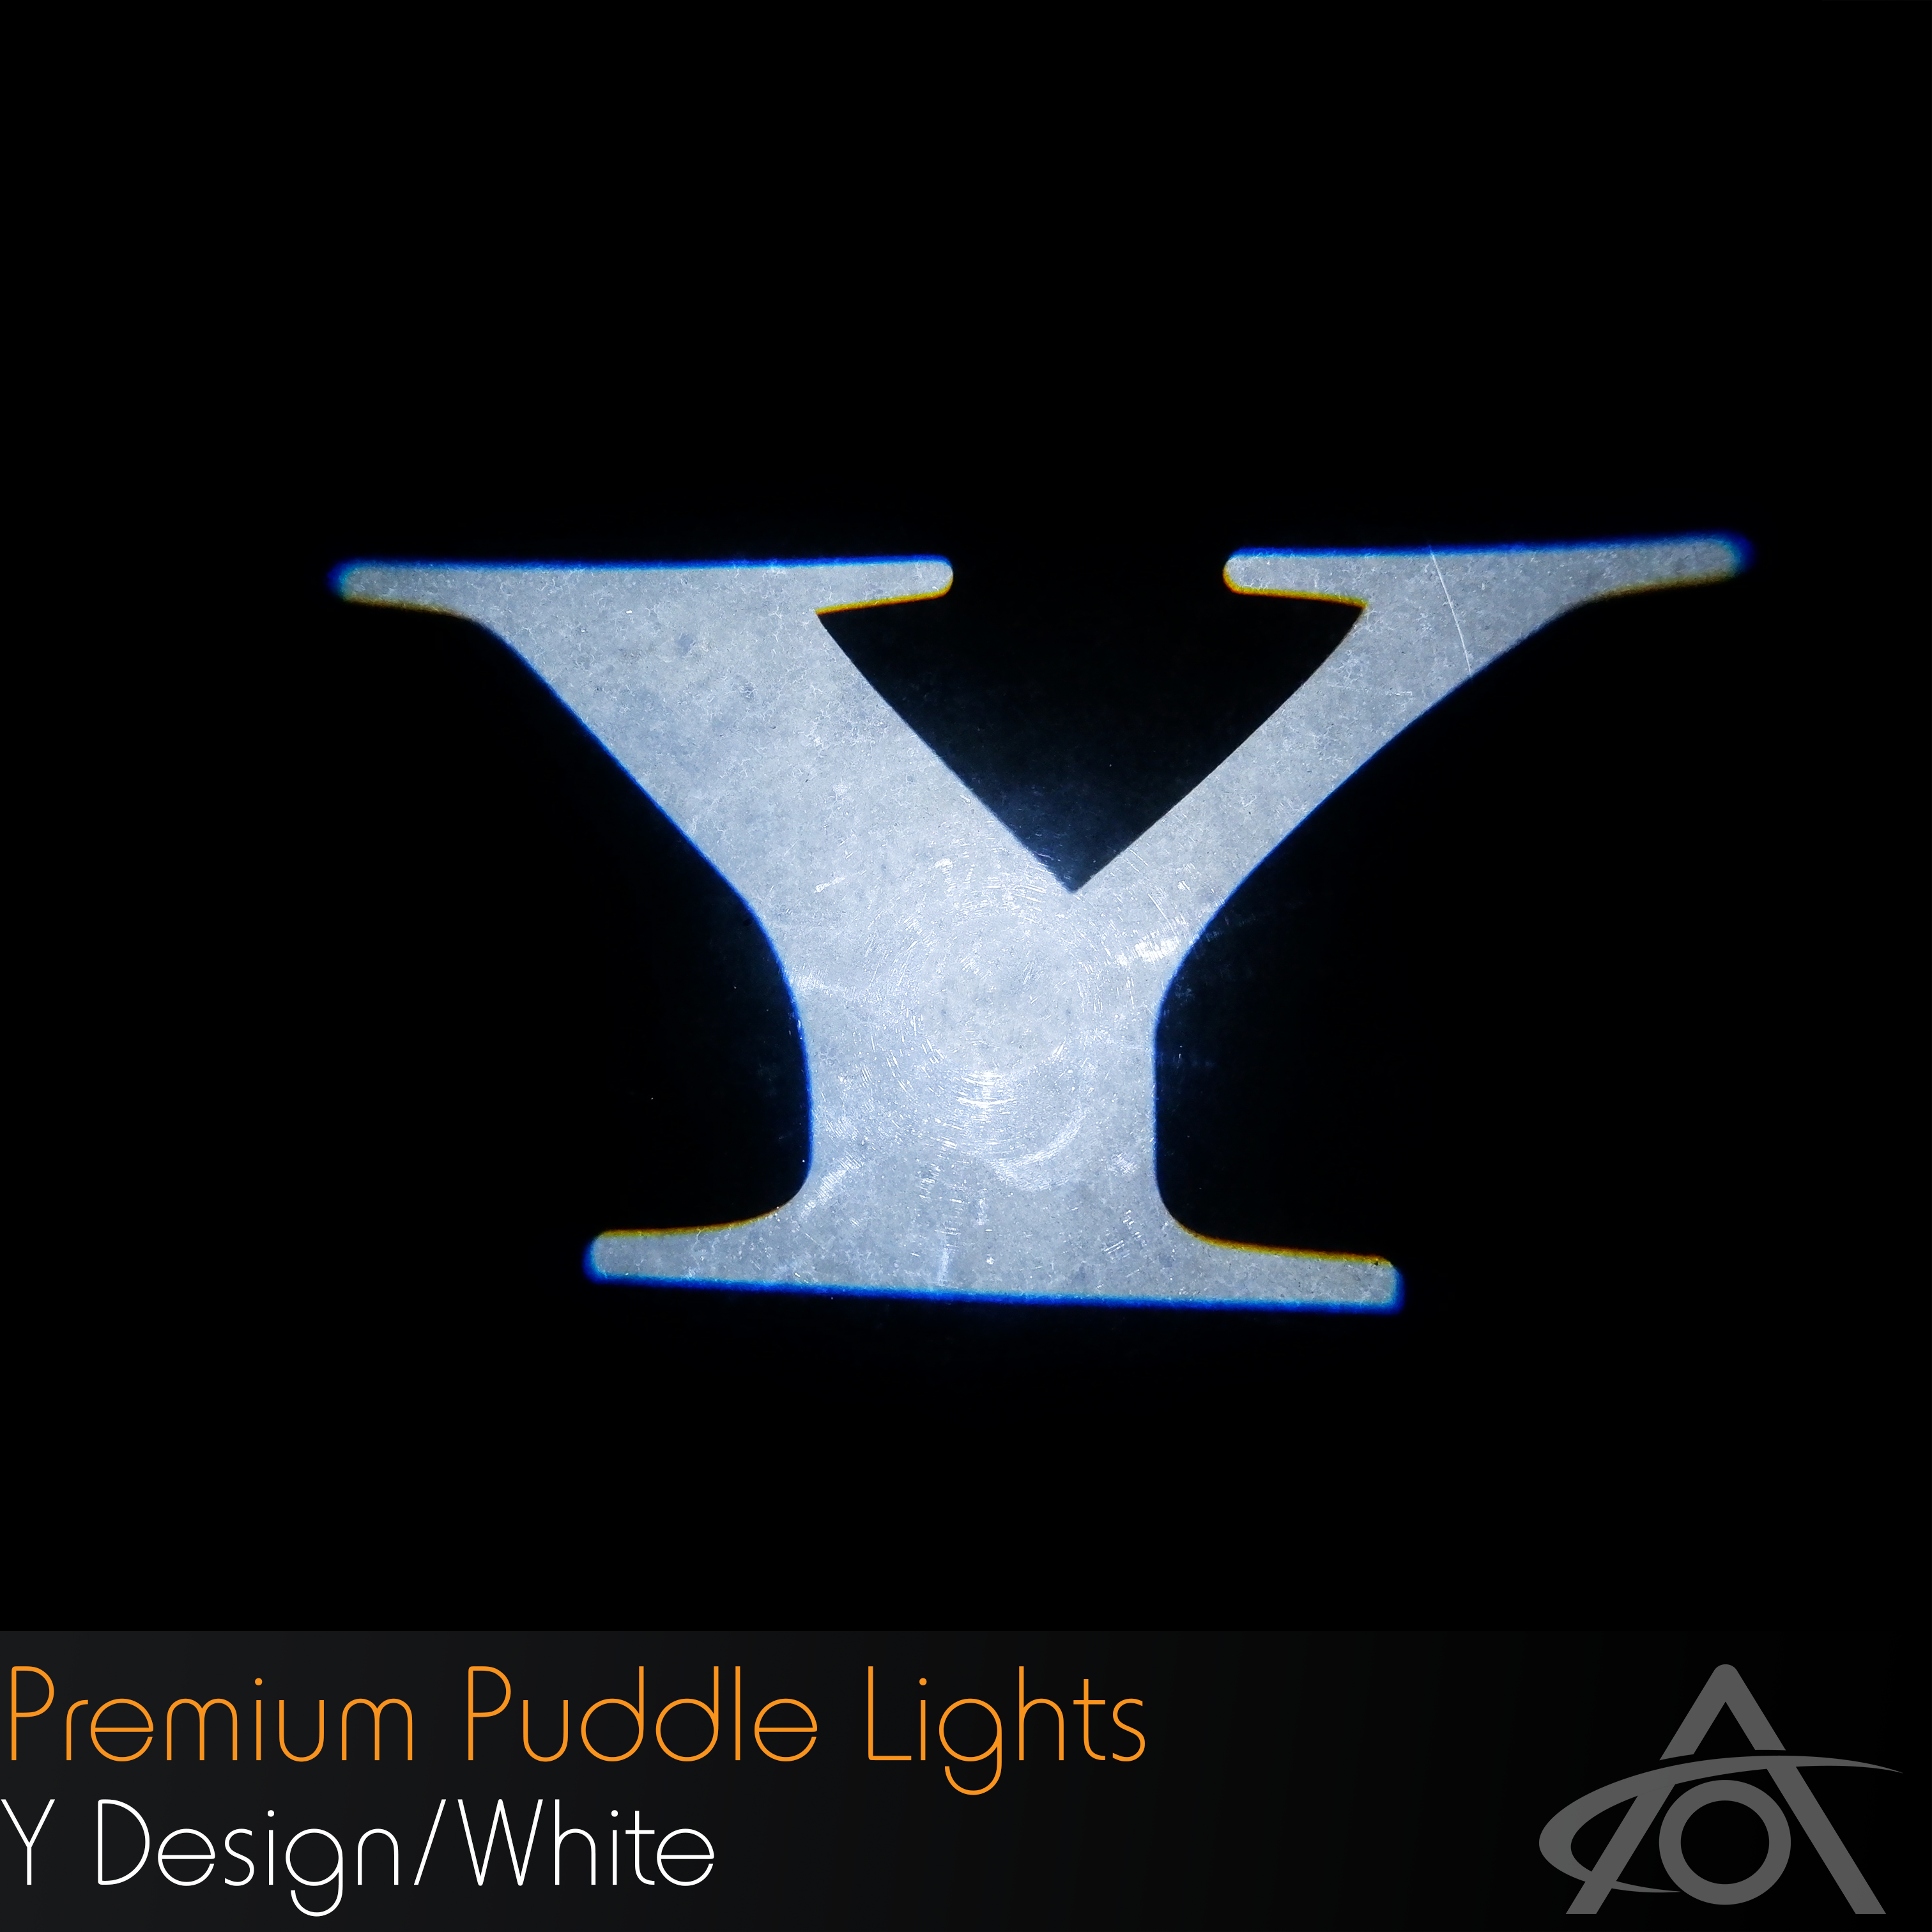 "Y" Ultra-Bright LED Premium Puddle Lights (white, pair)